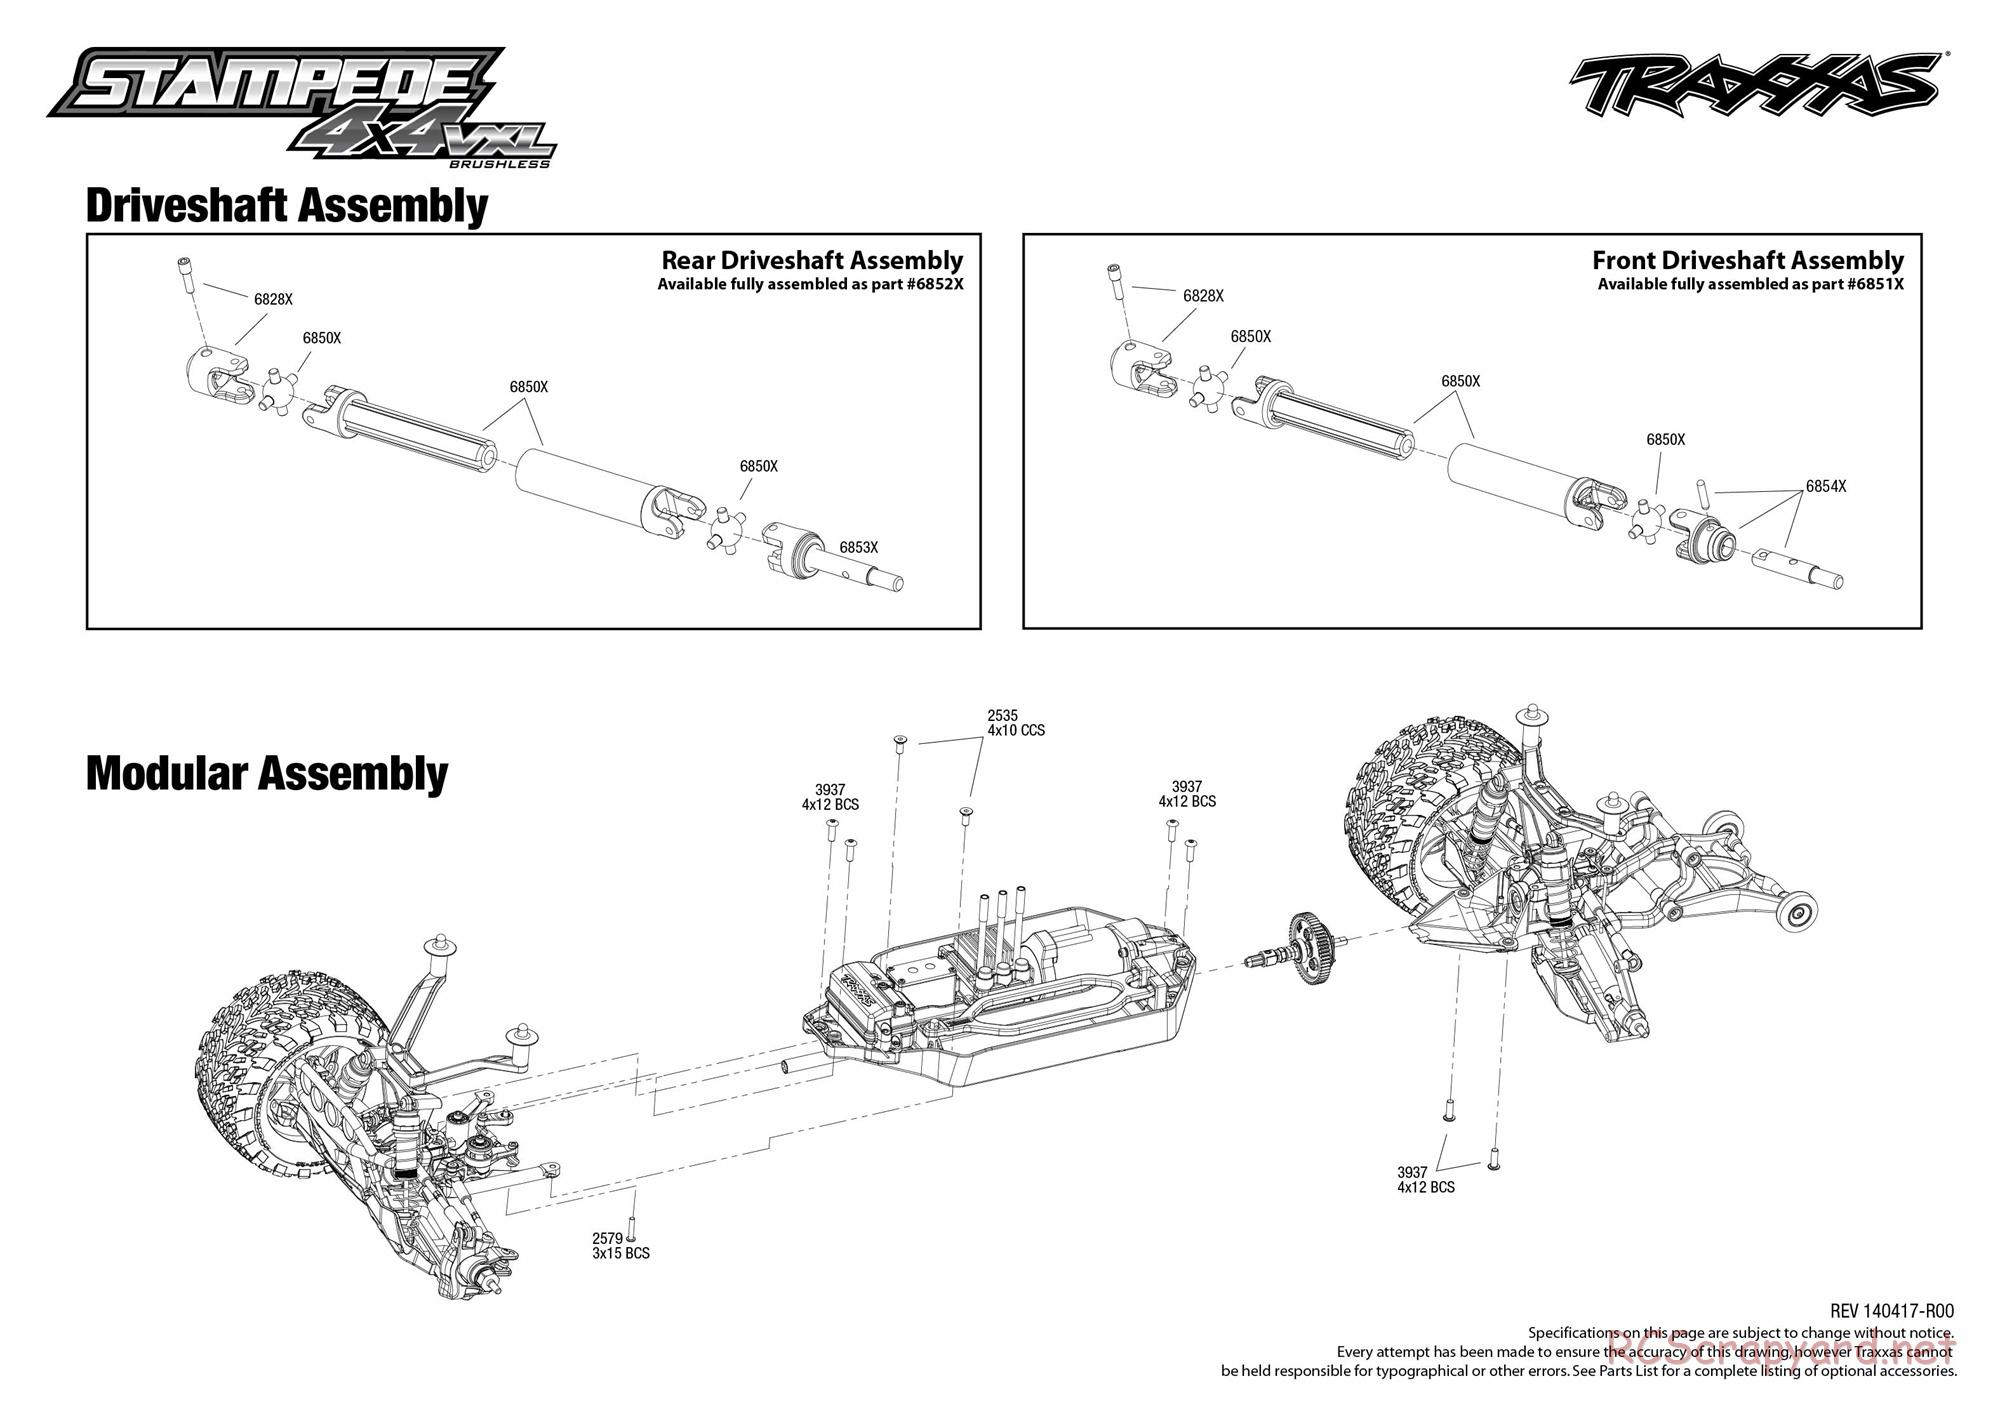 Traxxas - Stampede 4x4 VXL (2014) - Exploded Views - Page 2